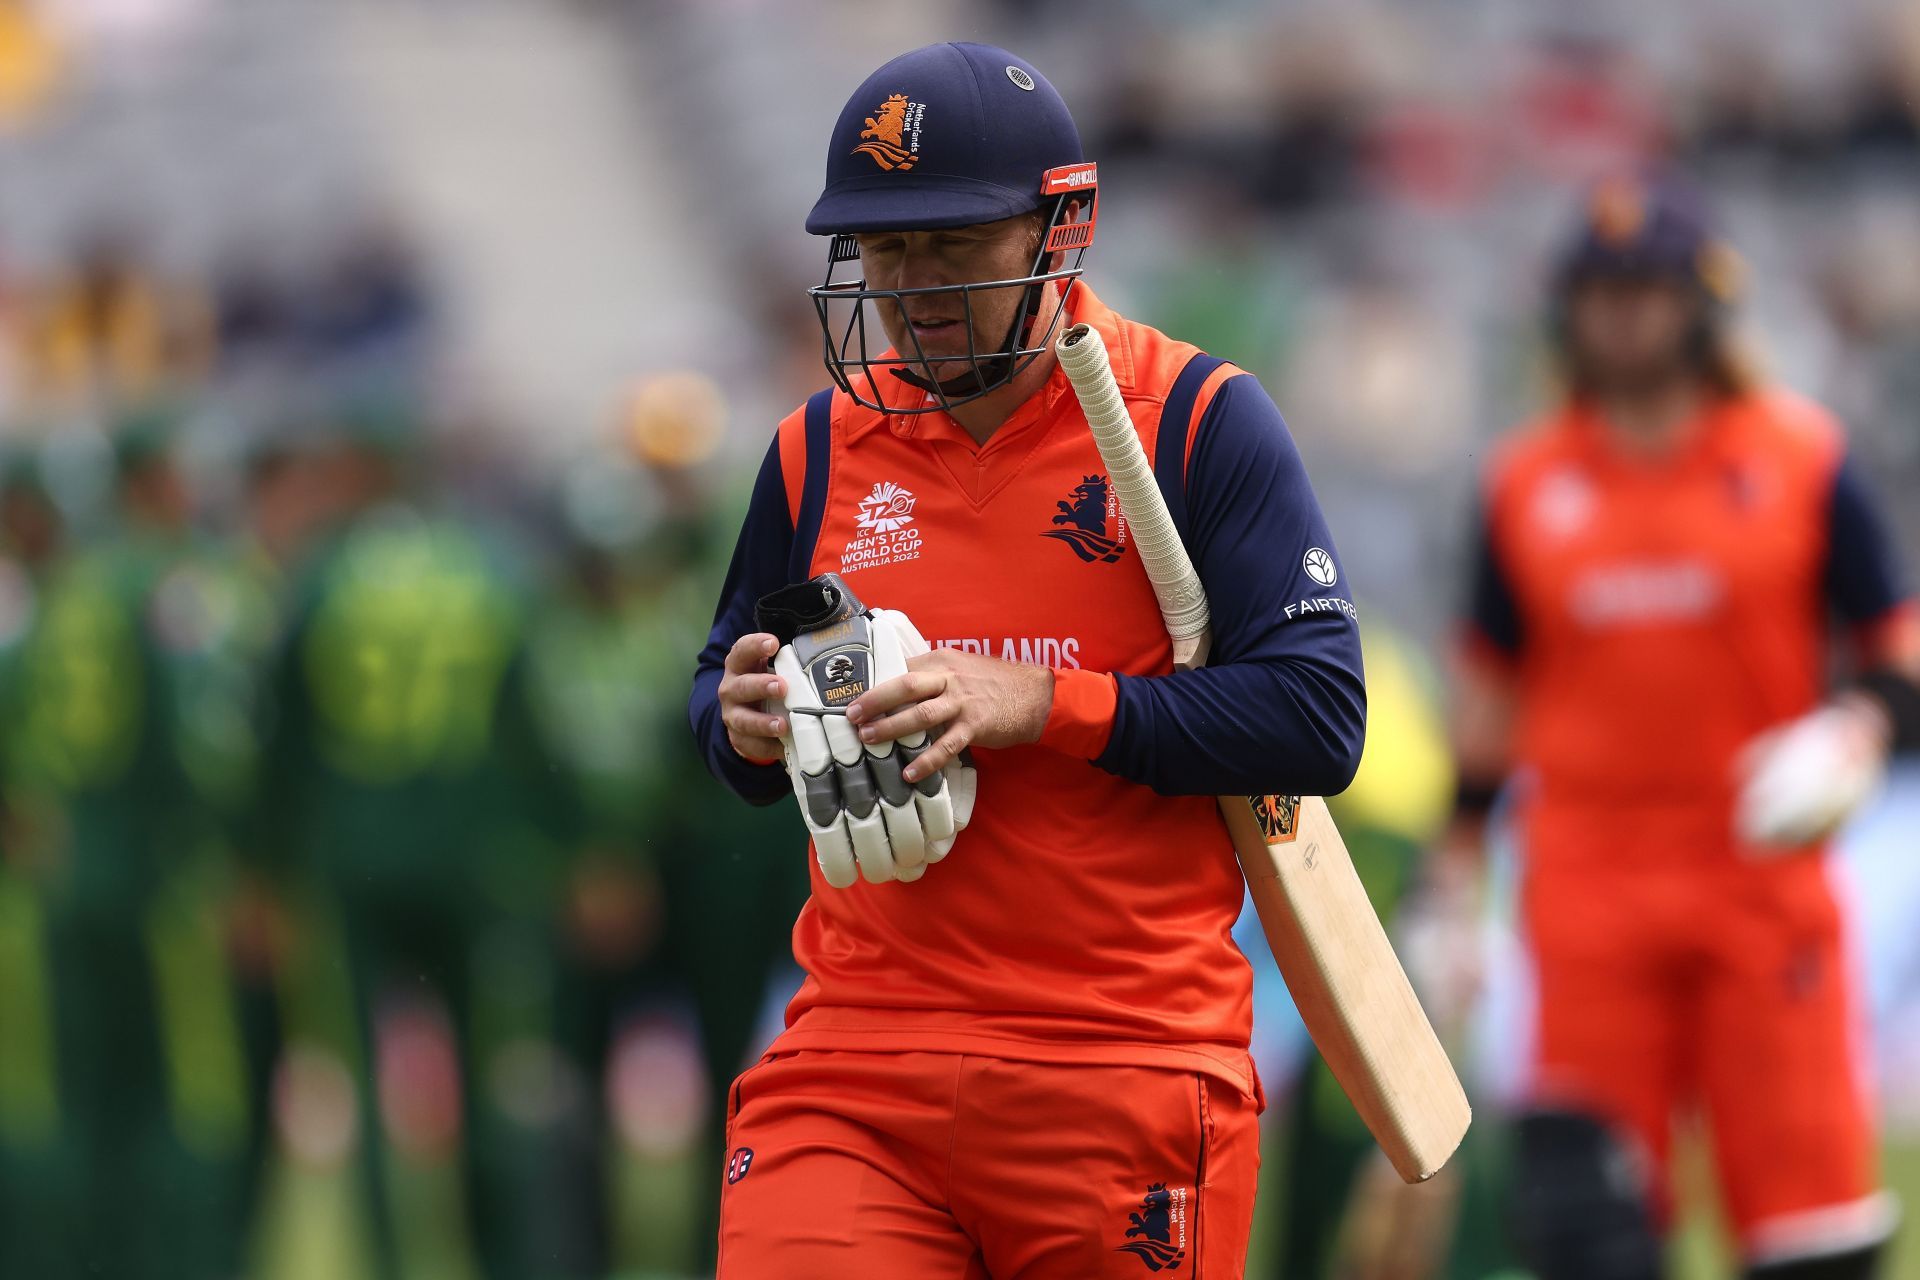 The Dutch team were never able to get going against the Pakistan side